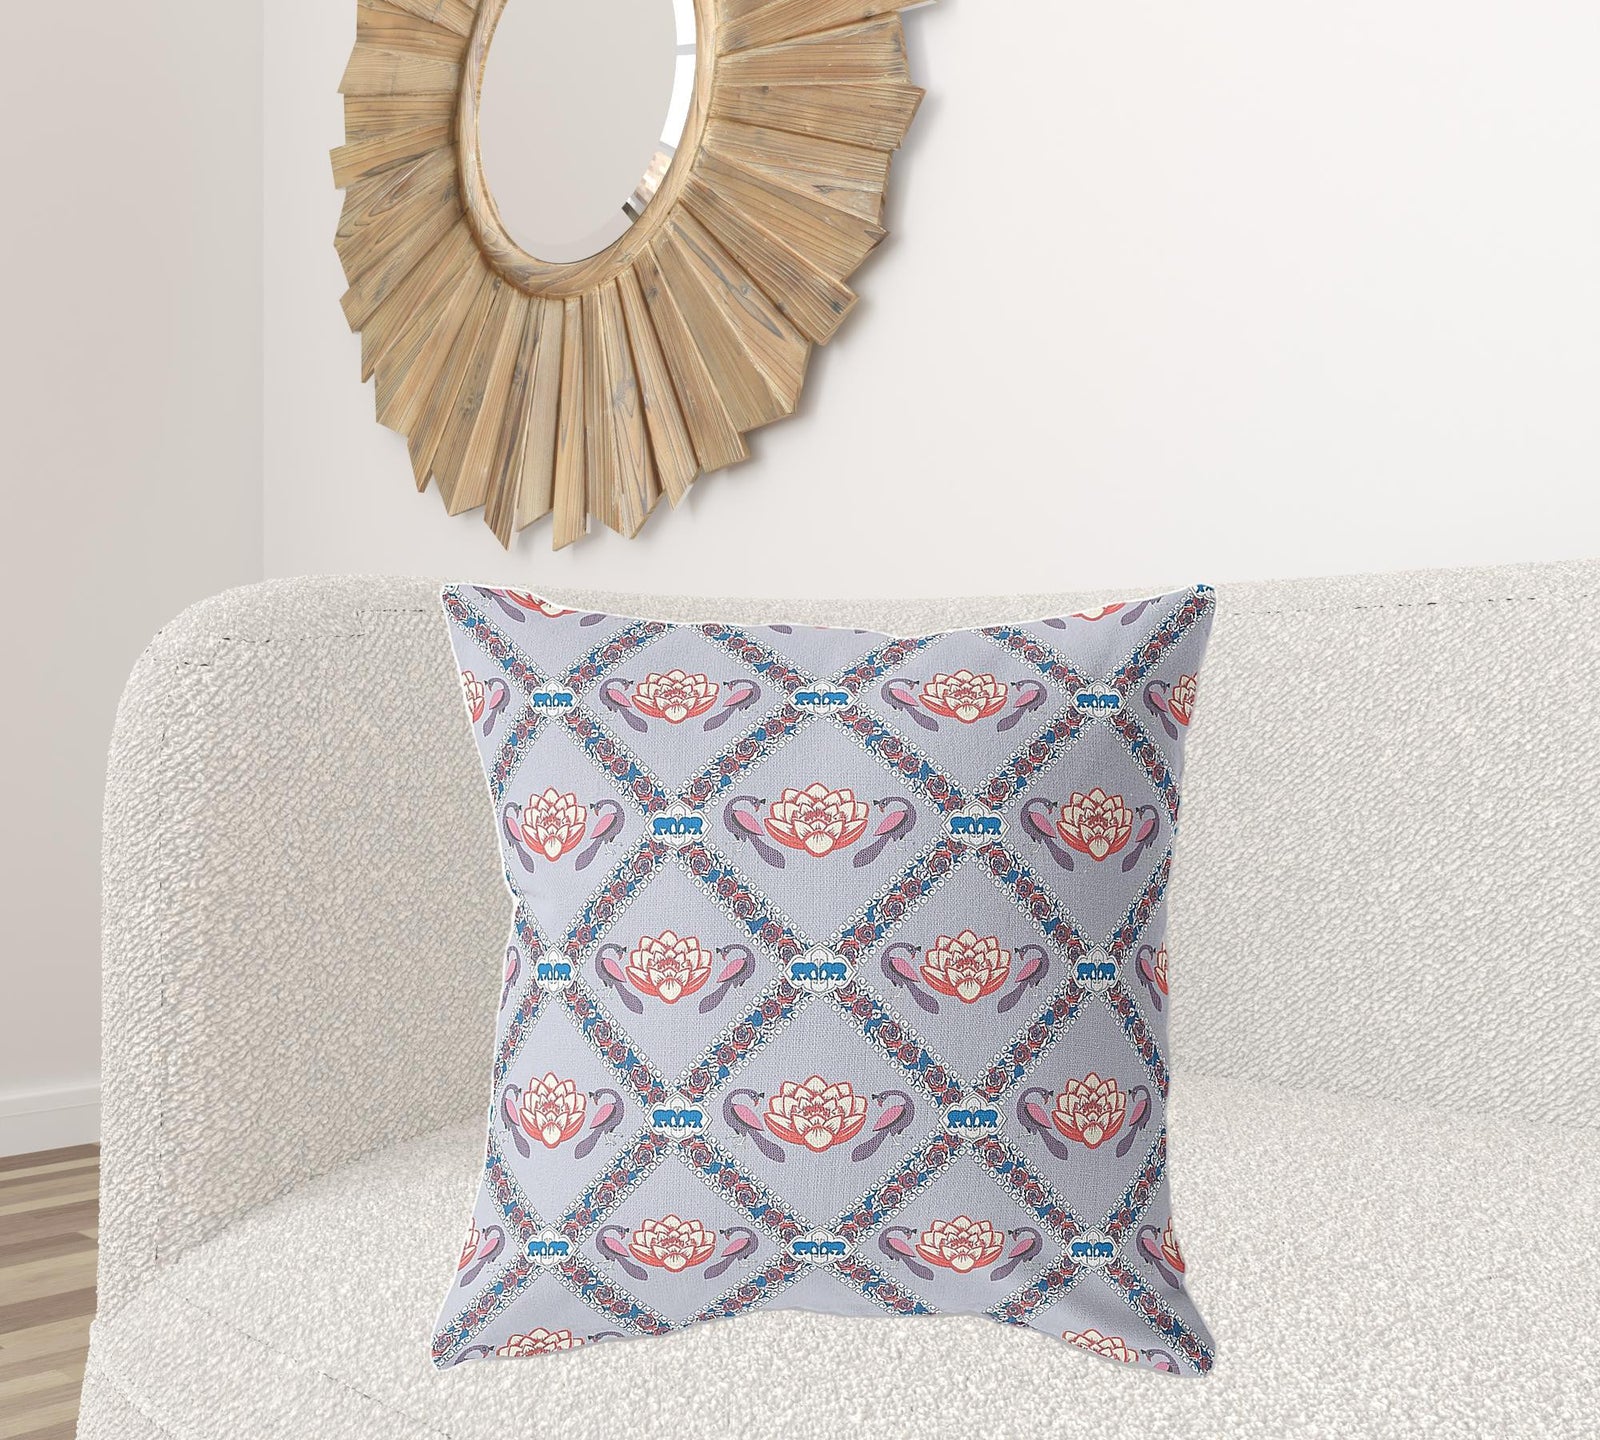 18"x18" Gray Red Blue Zippered Broadcloth Geometric Throw Pillow